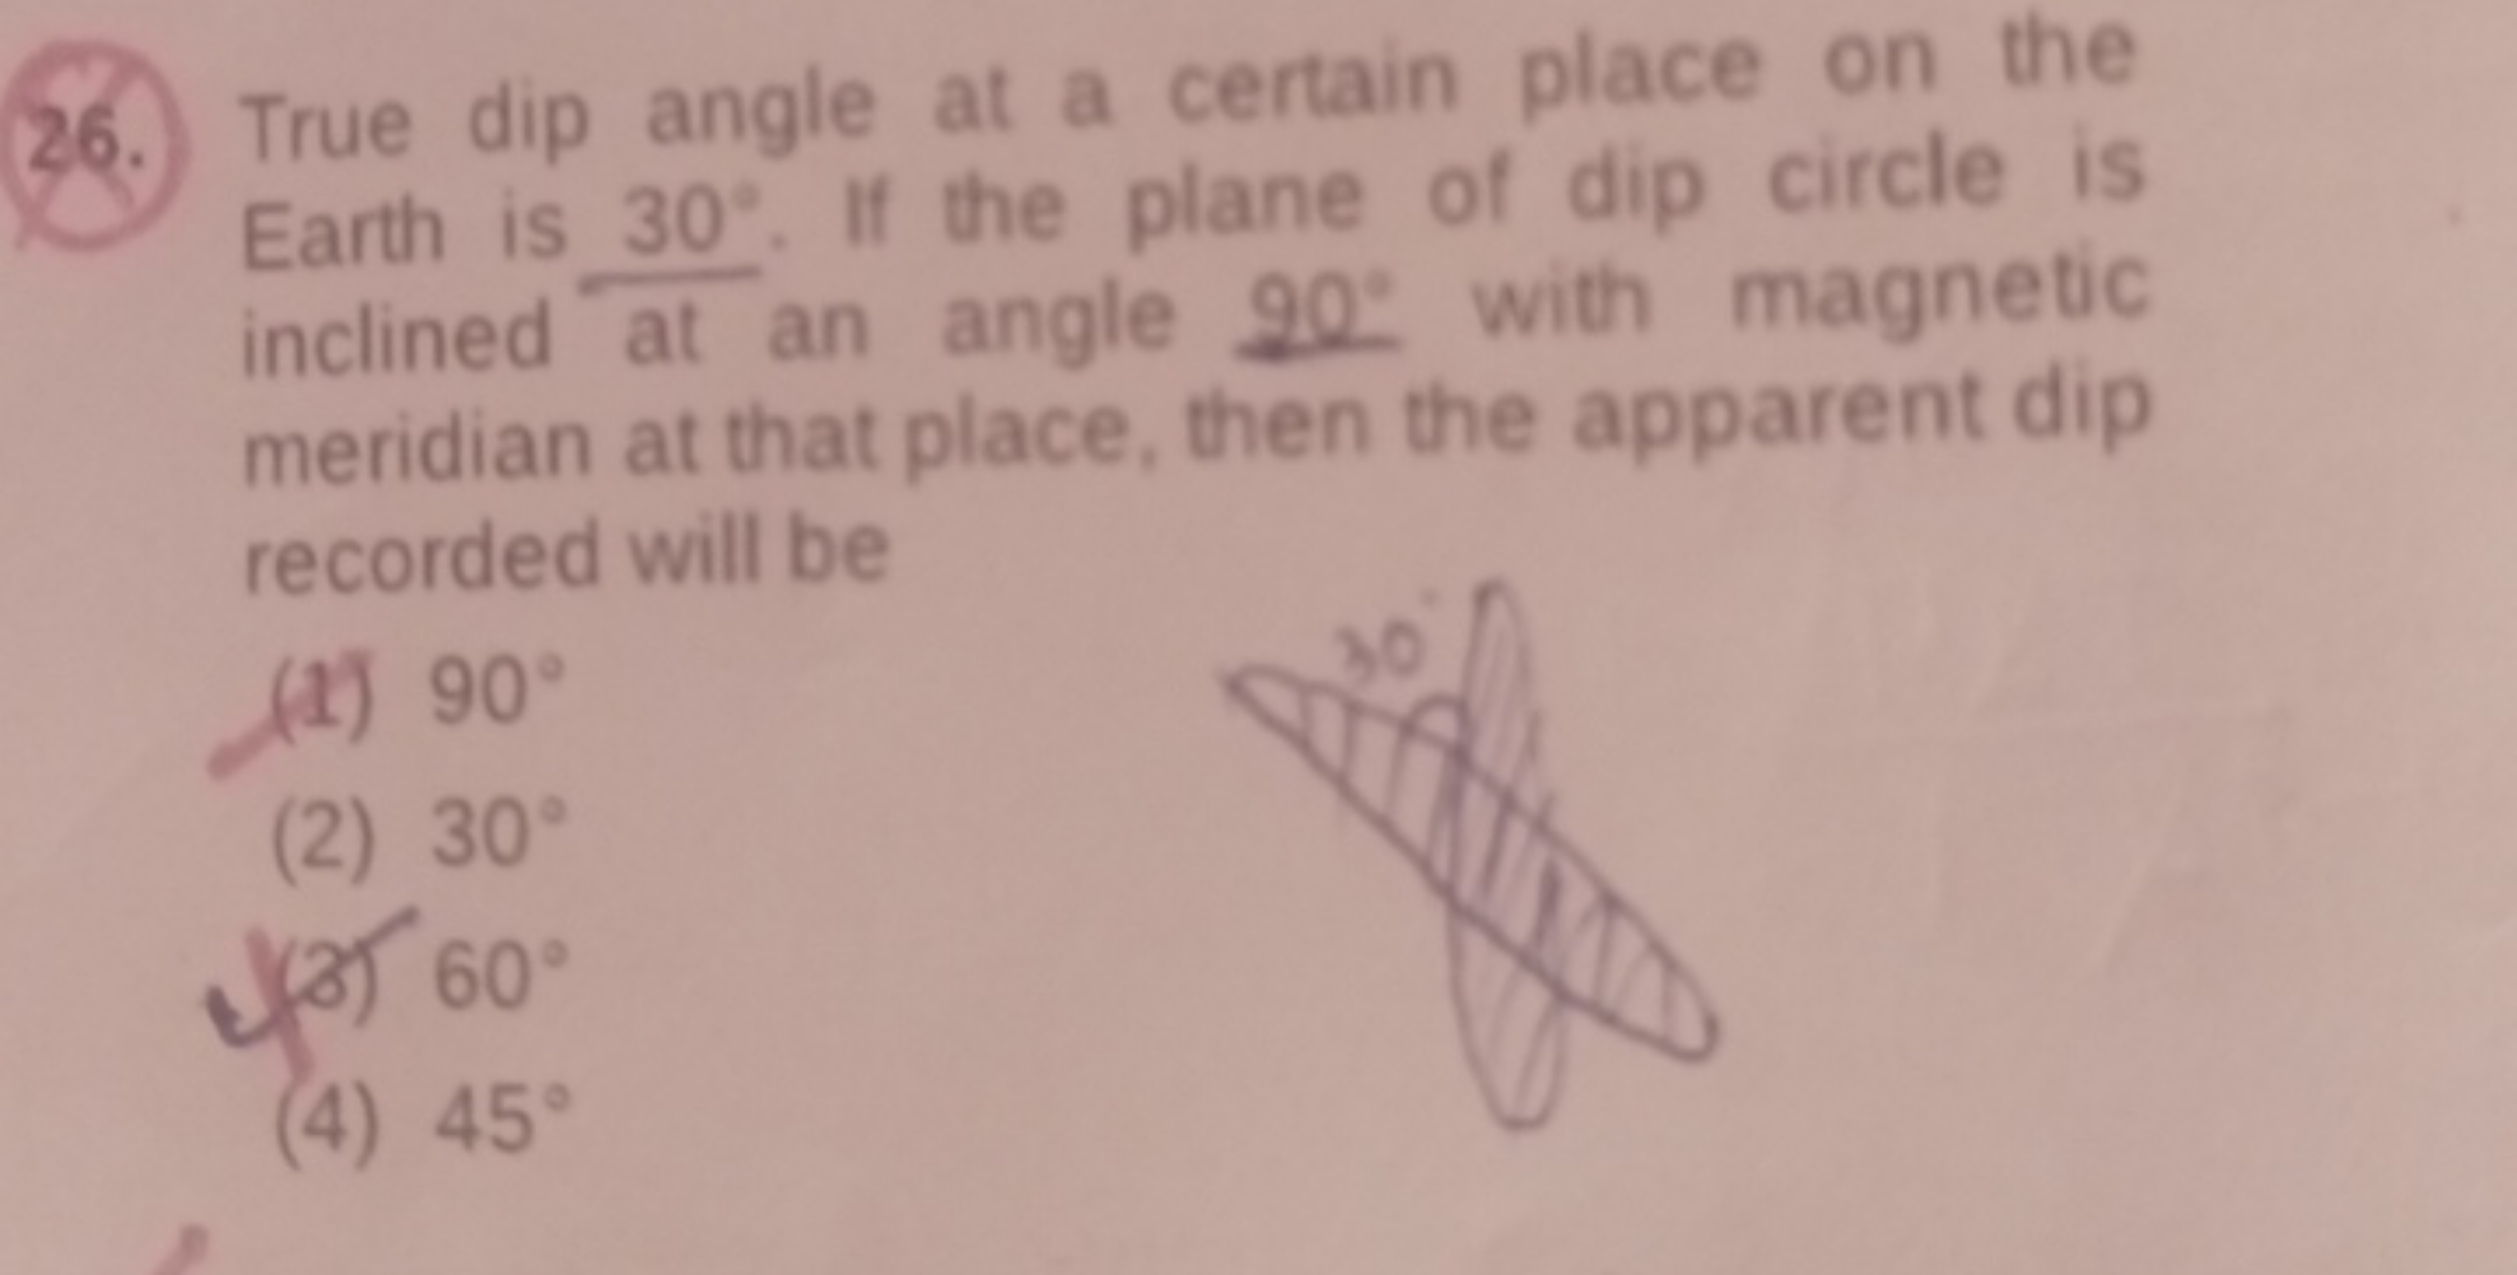 True dip angle at a certain place on the Earth is 30∘. If the plane of